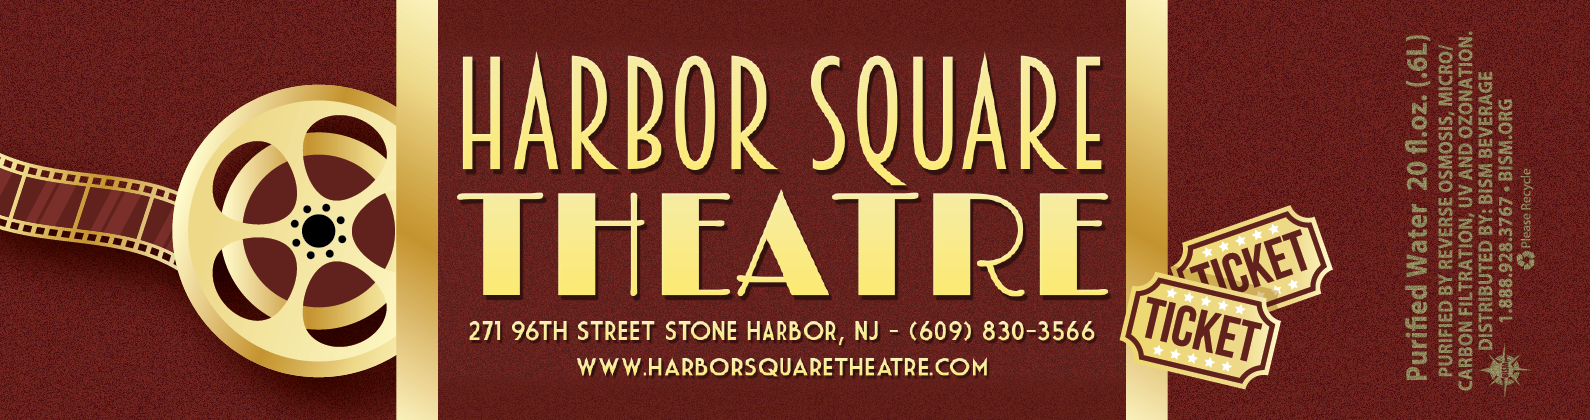 Harbor Square Theatre label - gold text and film reel on red carpet background